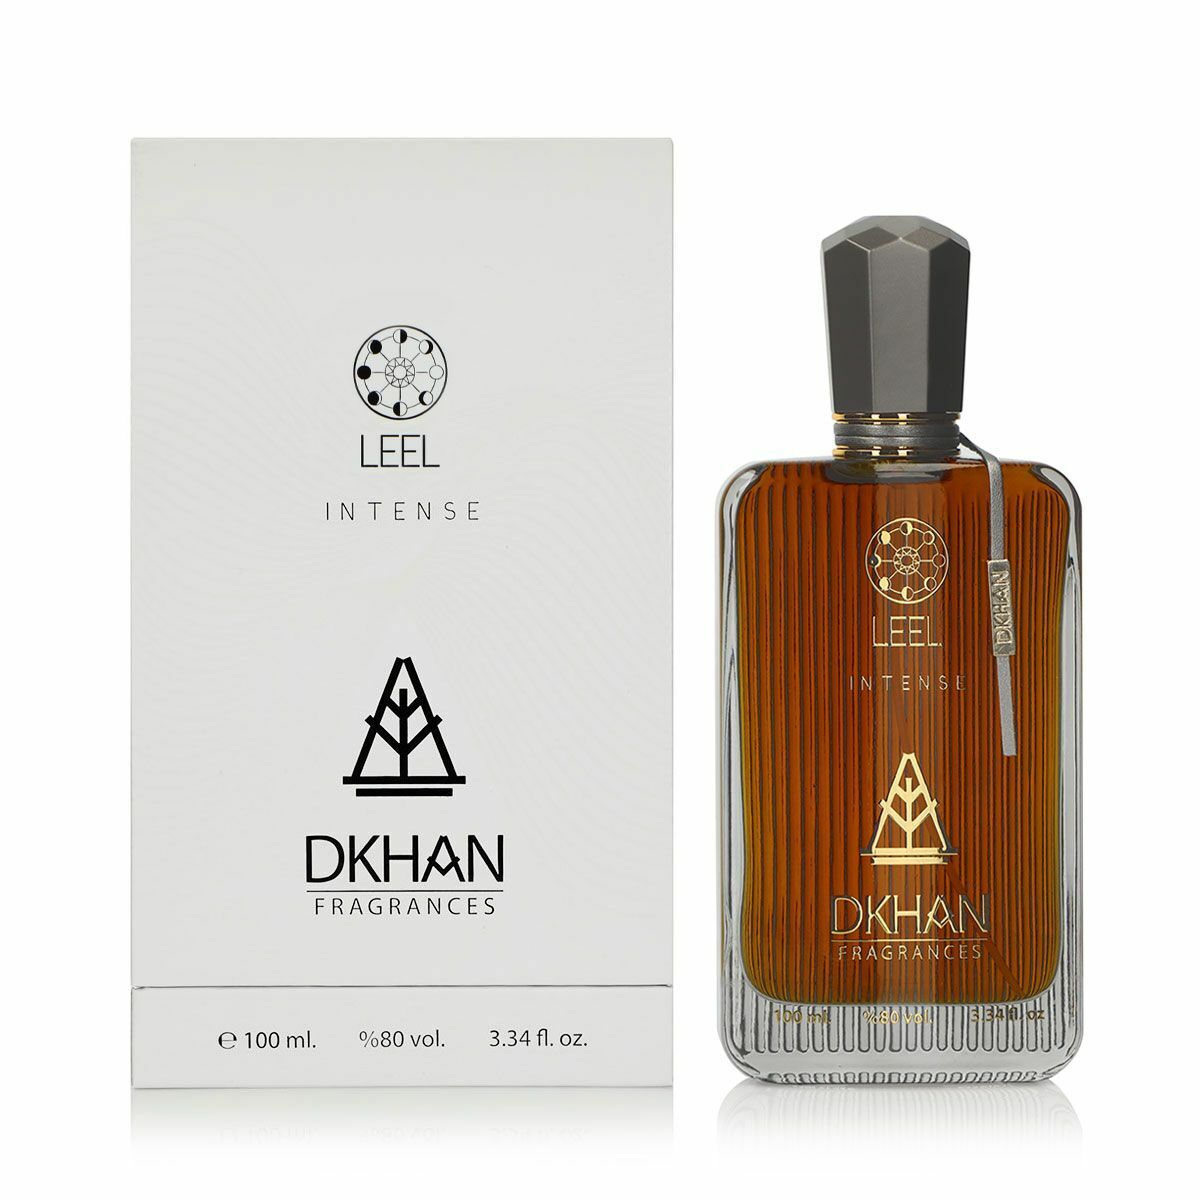 The image displays a rectangular glass perfume bottle with an amber-colored fragrance, labeled "LEEL INTENSE" at the front, along with the "DKHAN FRAGRANCES" emblem. The bottle has a black faceted cap, a label on the right side, and rests on a clear glass base. Beside the bottle stands its white packaging box, which mirrors the bottle's branding with the name "LEEL INTENSE" and the emblem "DKHAN FRAGRANCES" printed in black.